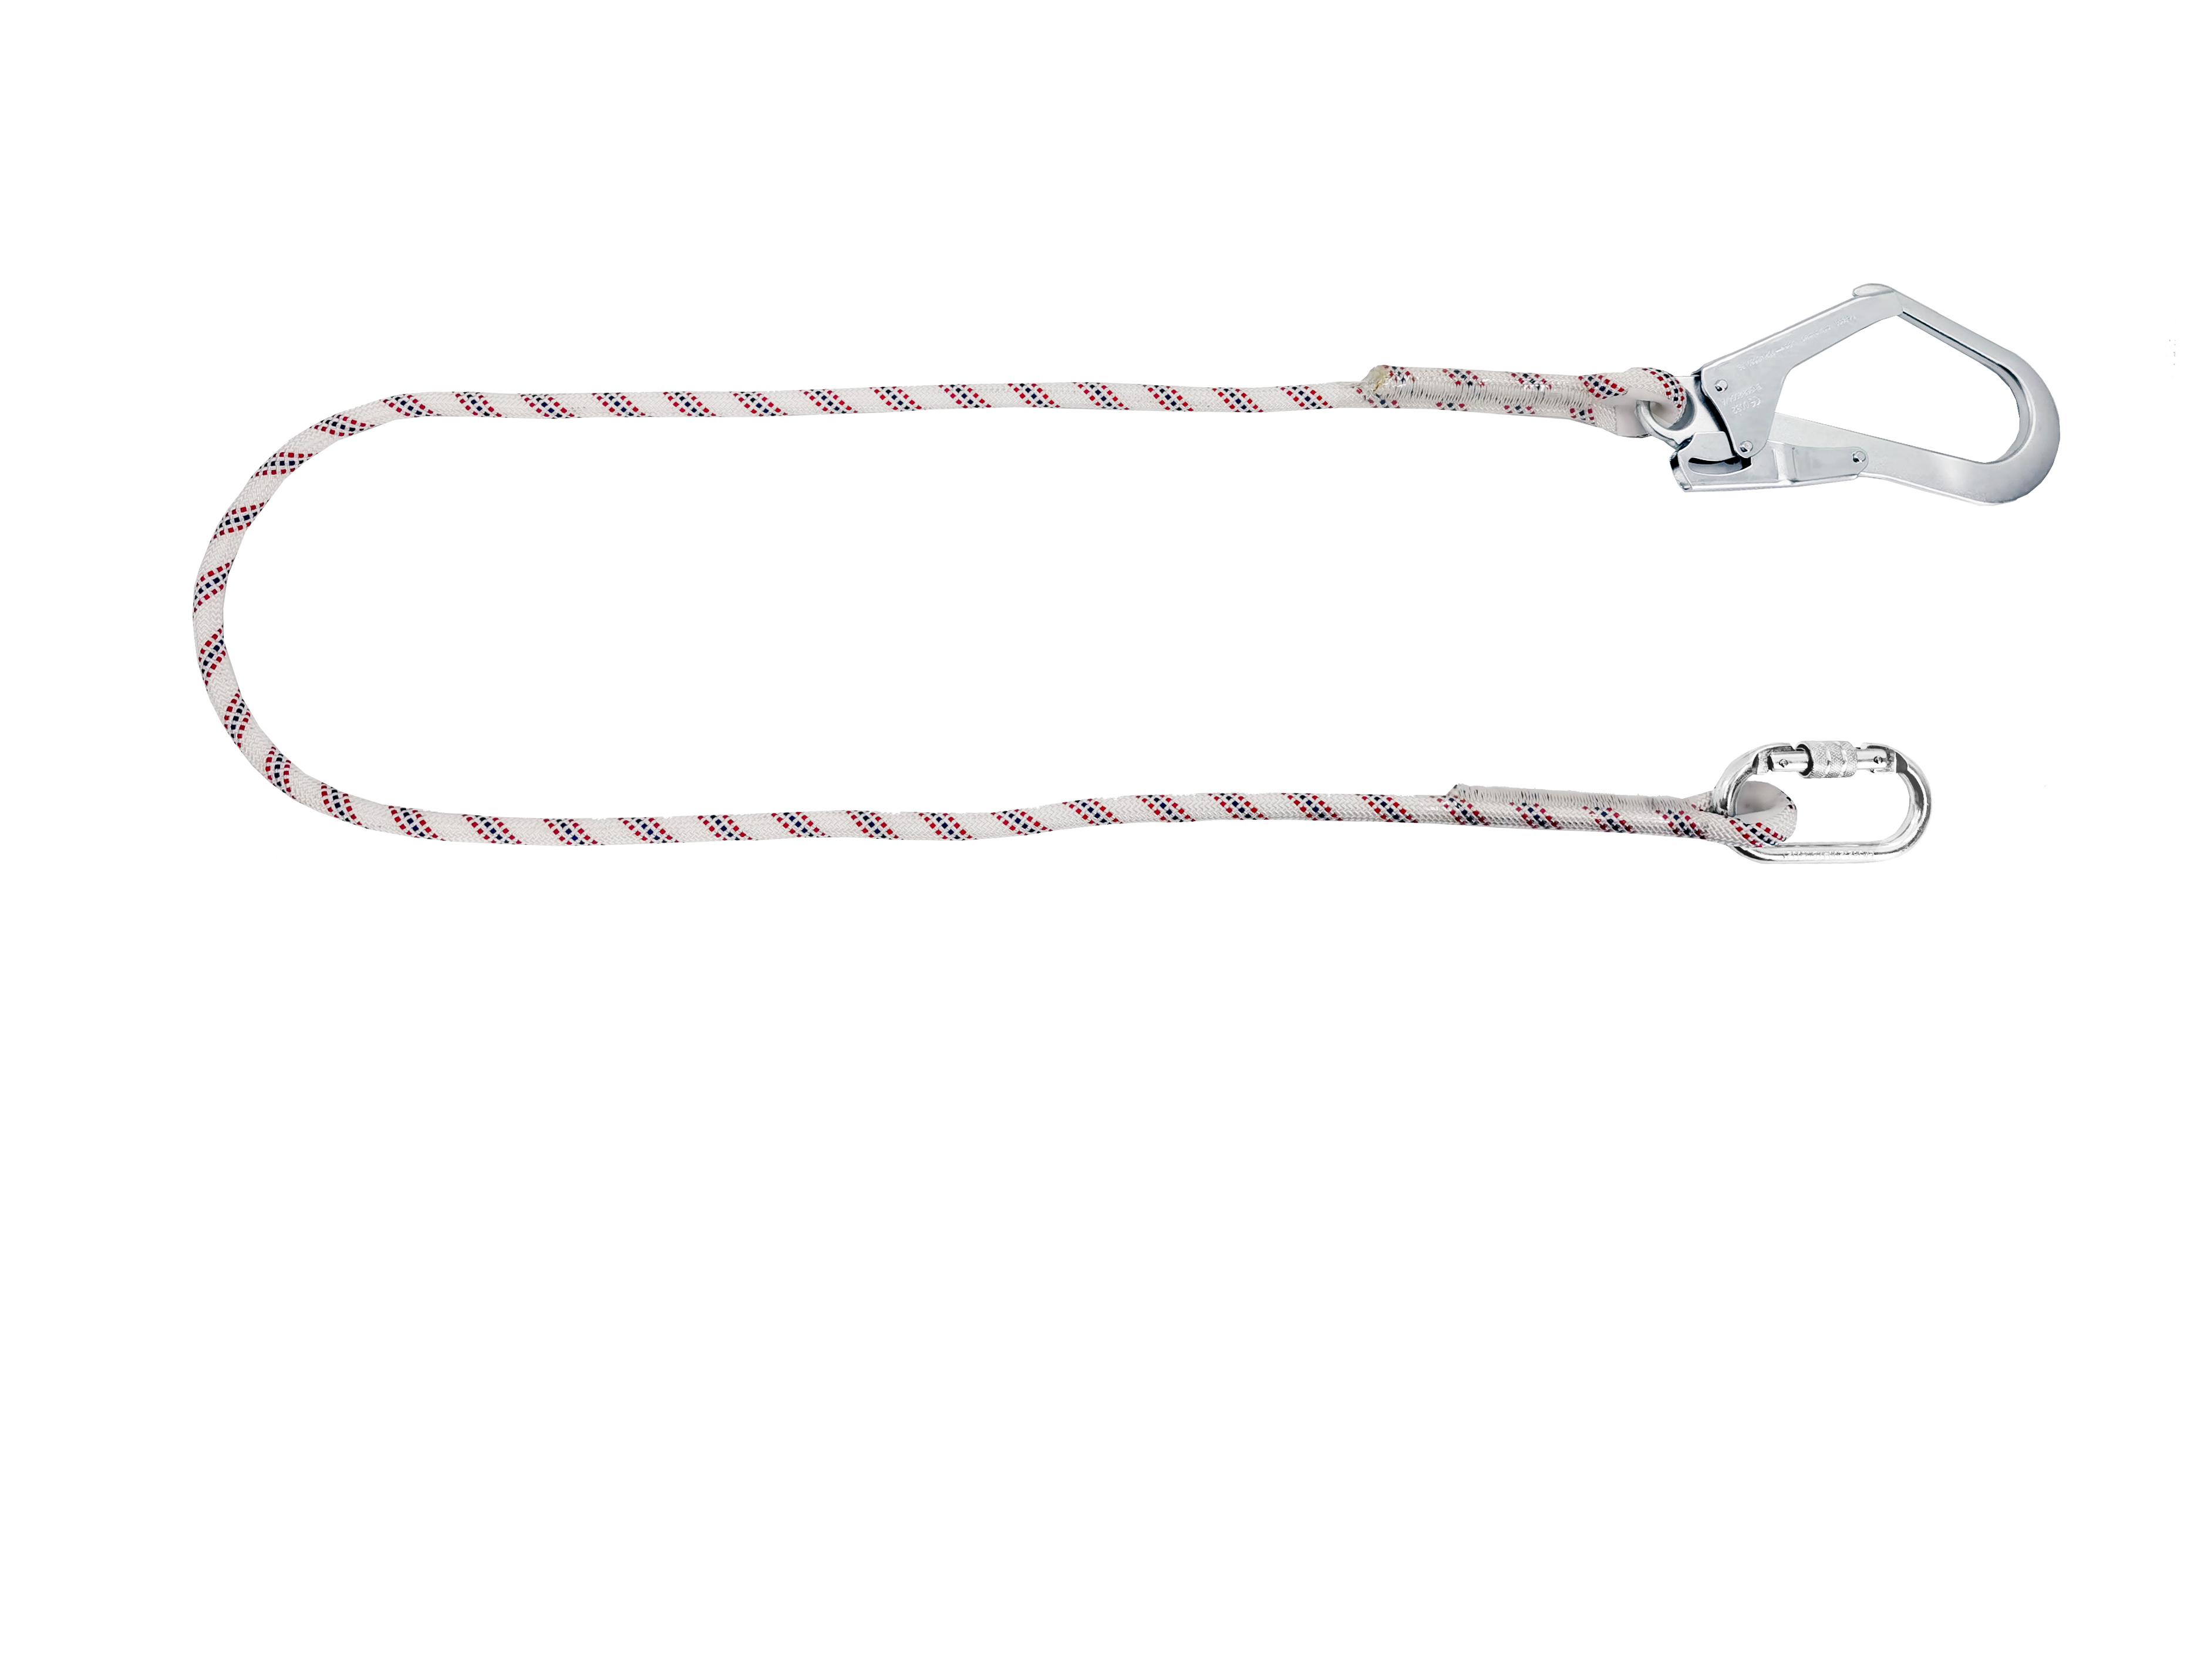 SYL002 Rope Lanyard for Fall Protection with Single Big Hook